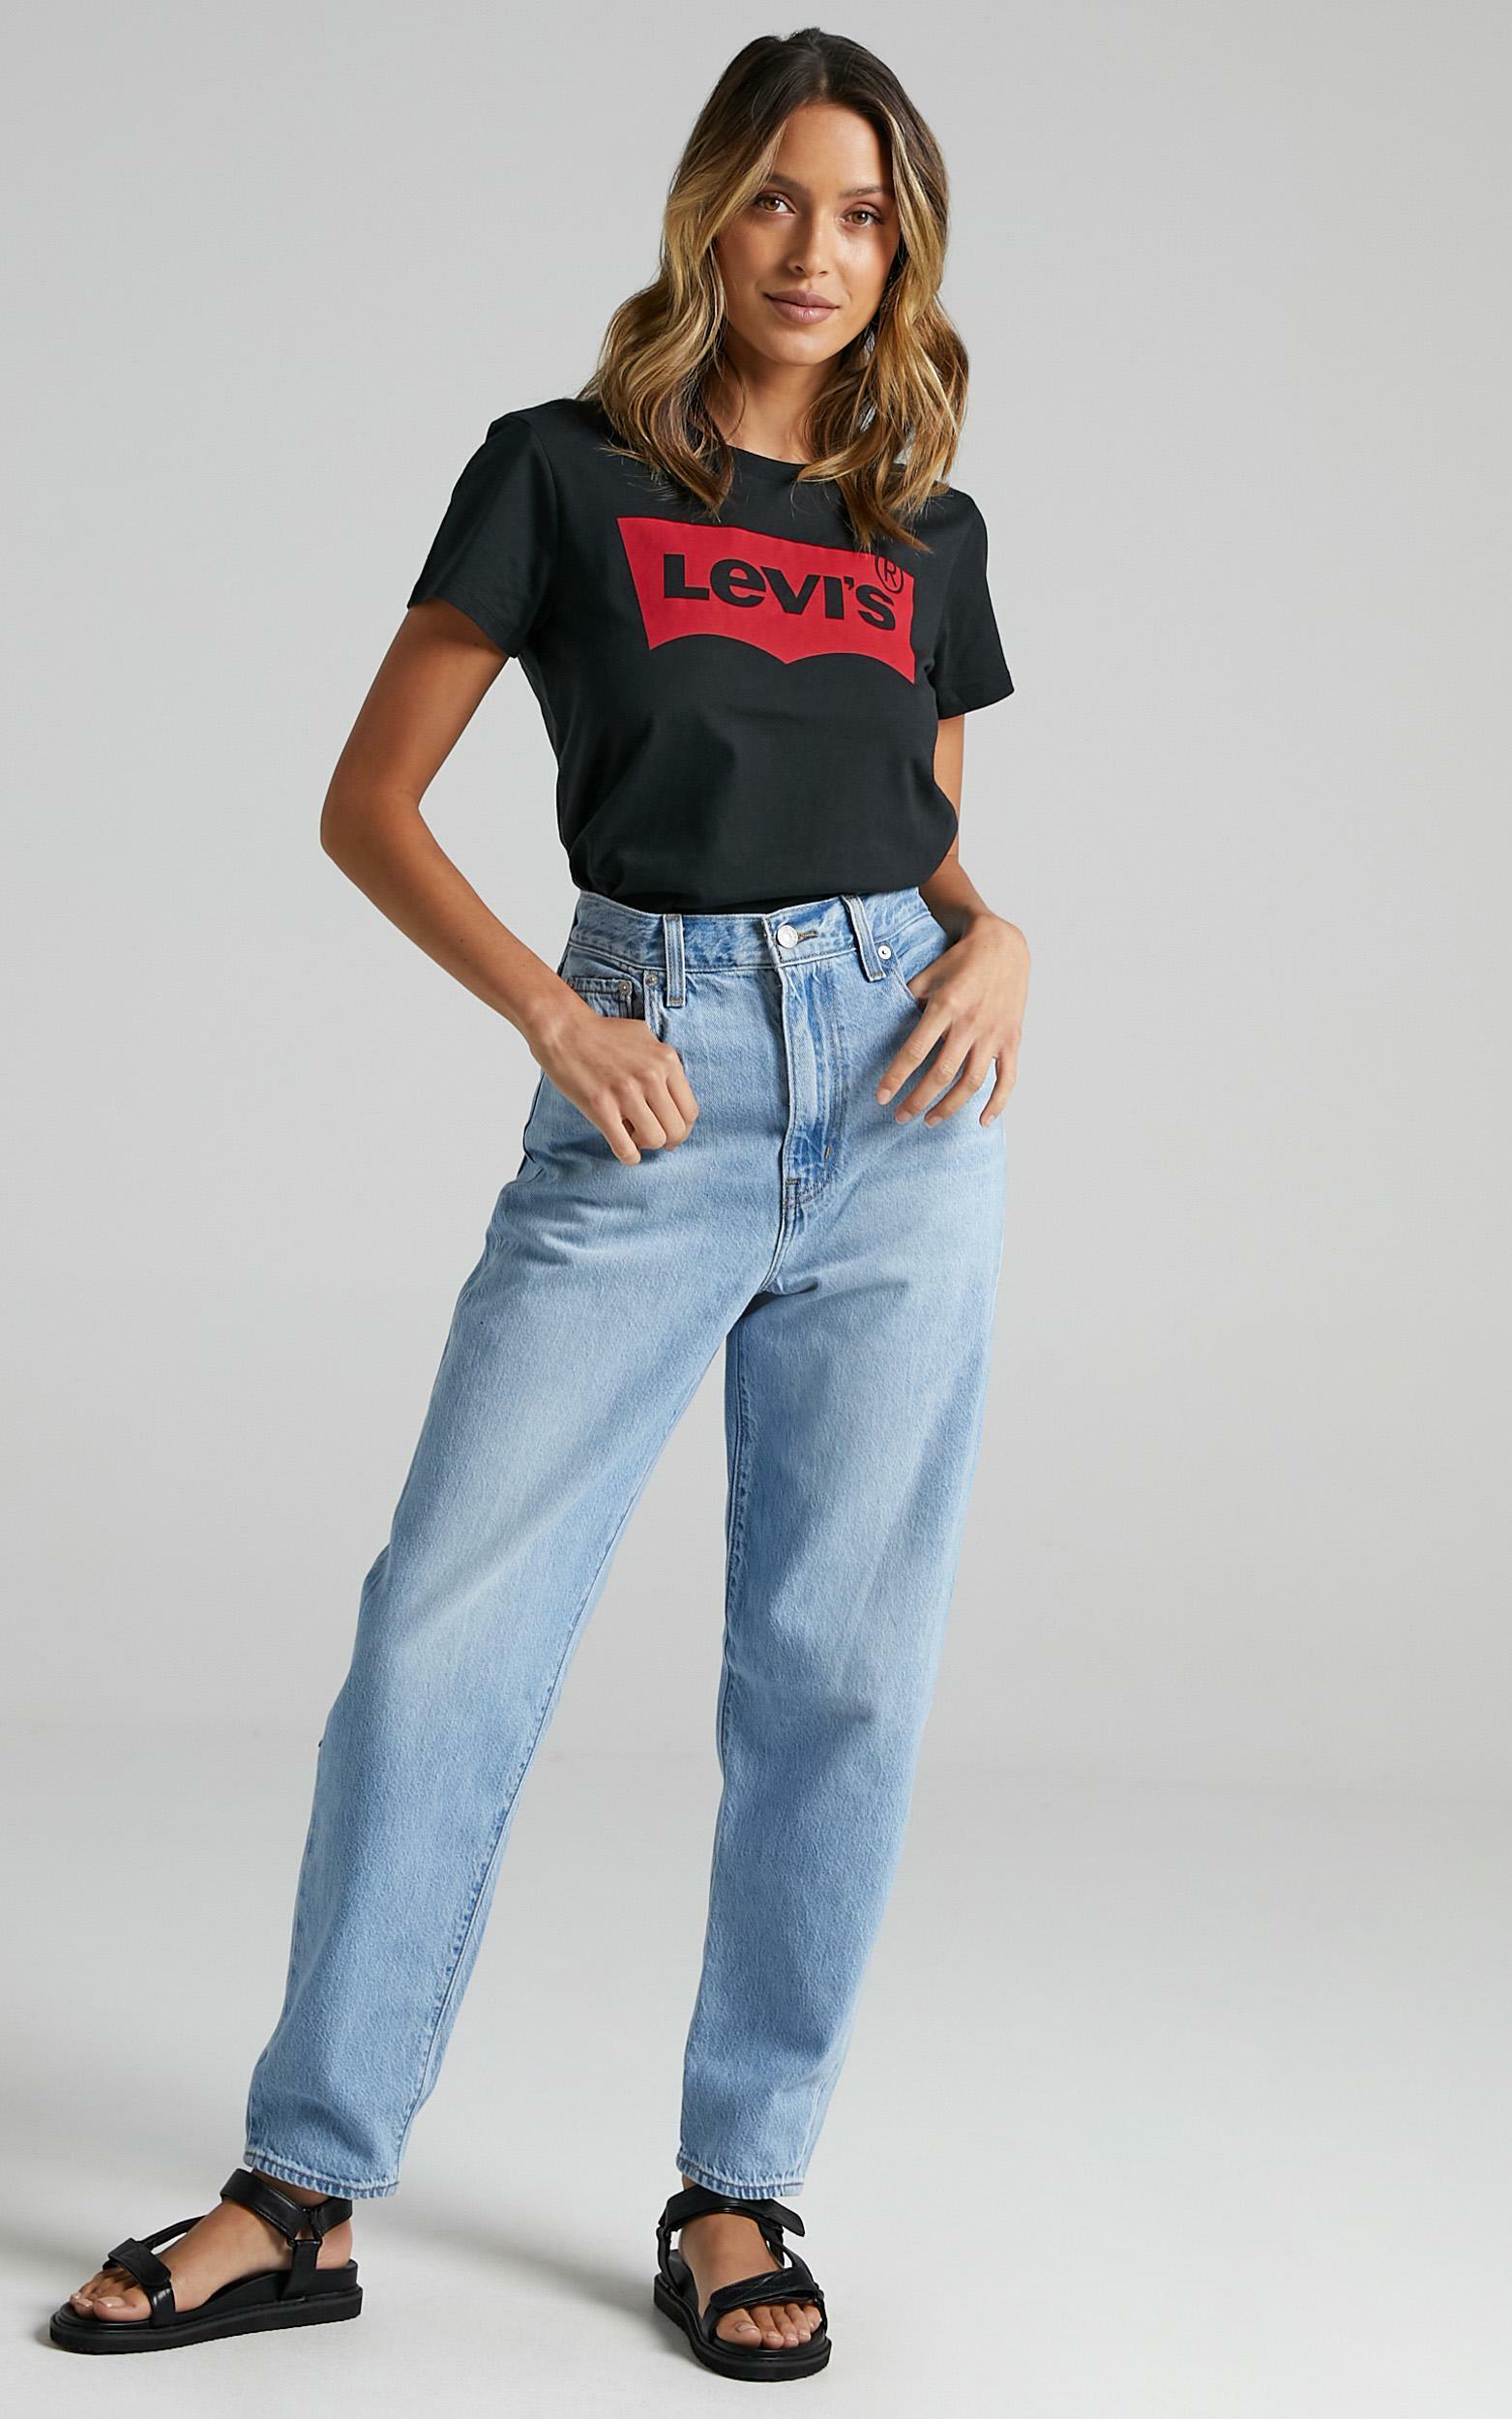 Levi's - Perfect Batwing Tee in Mineral Black - XS, BLK1, hi-res image number null